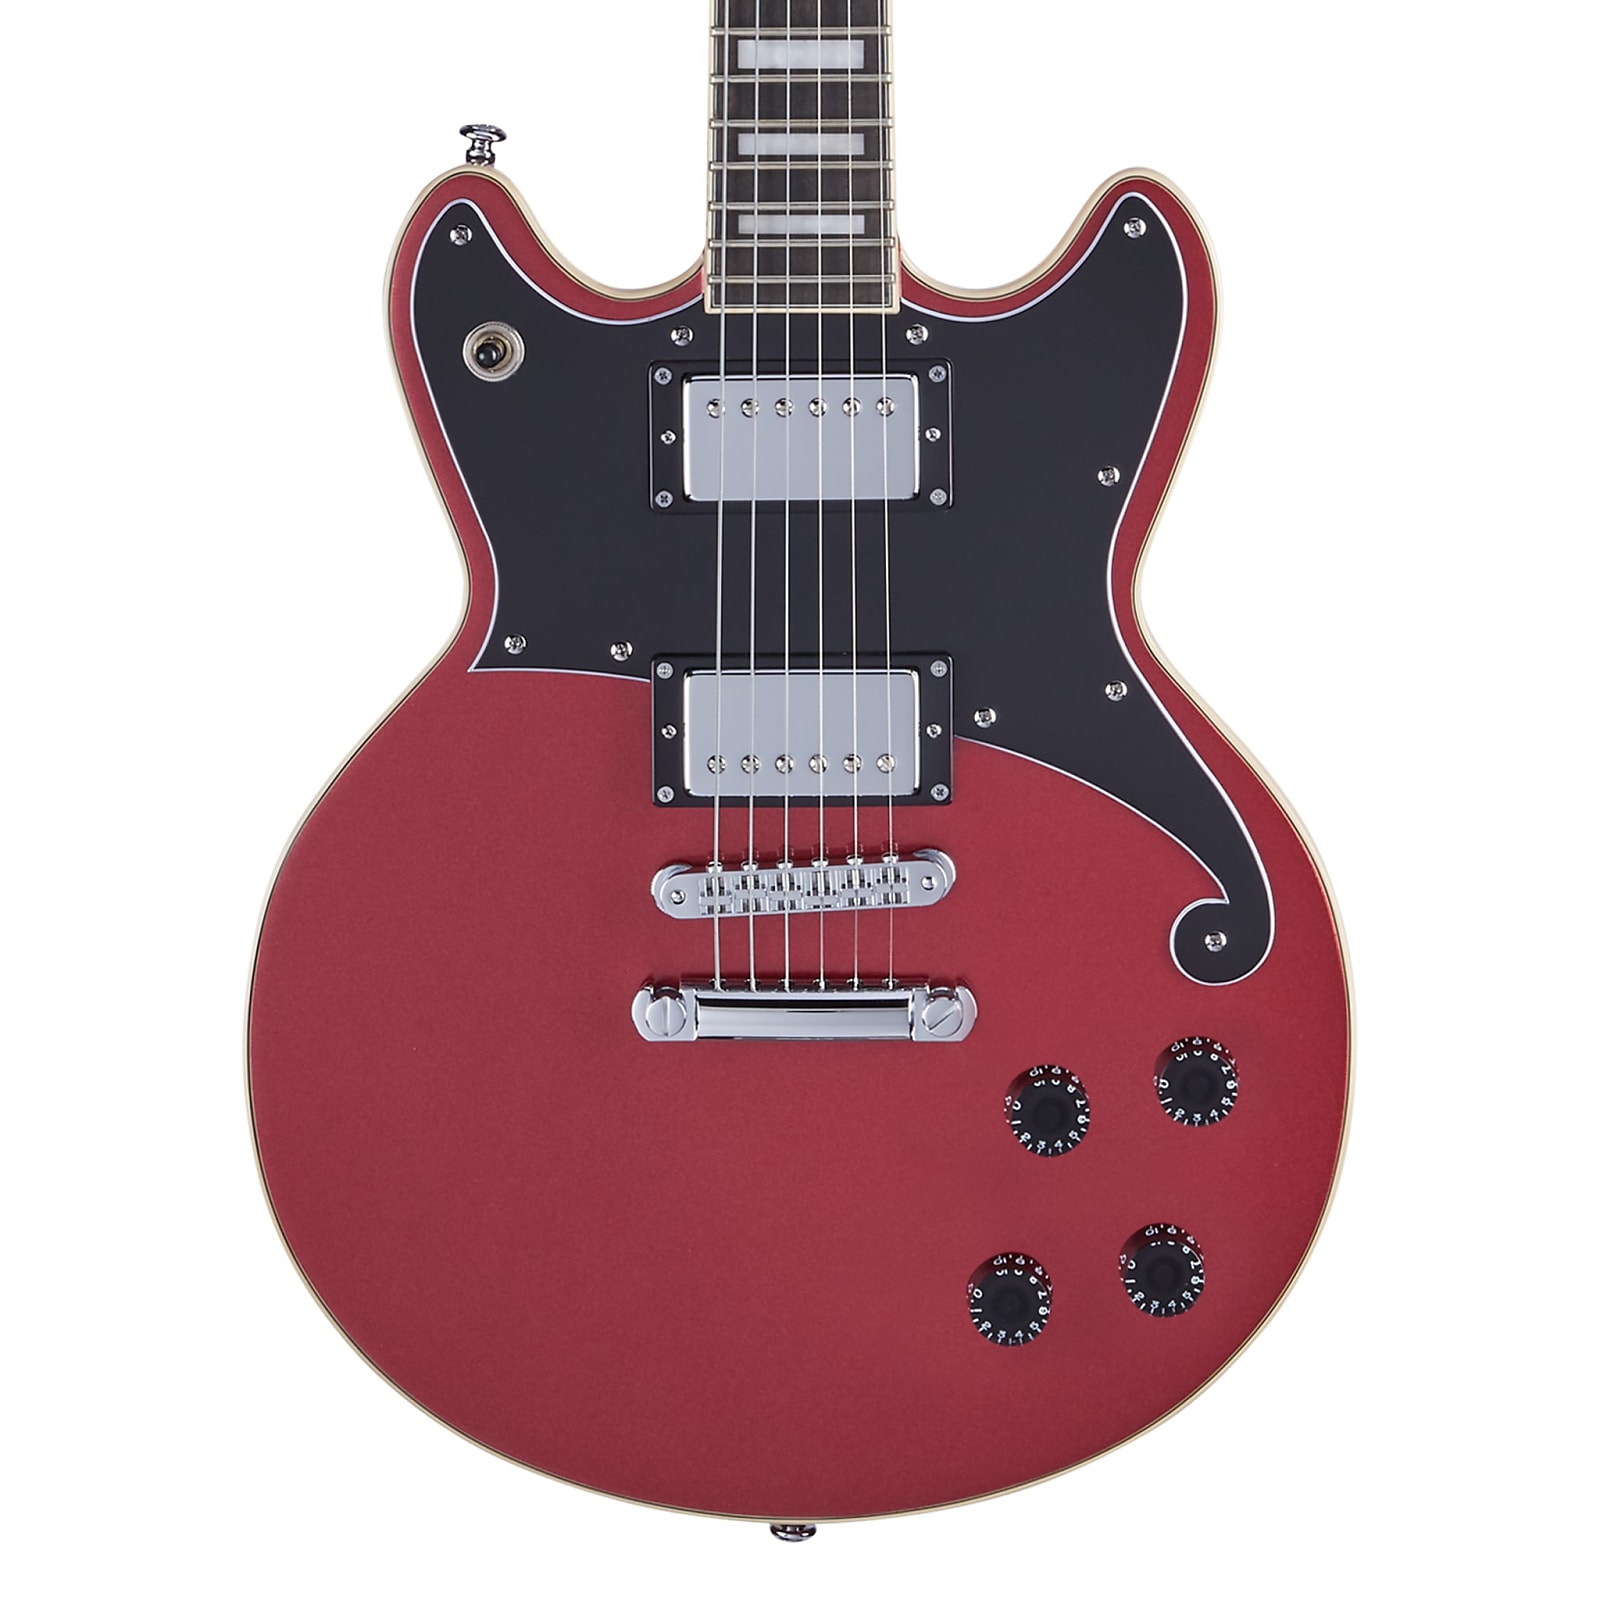 D'Angelico Premier Brighton Solid Body Double Cutaway Electric Guitar in Oxblood w/ Gig Bag